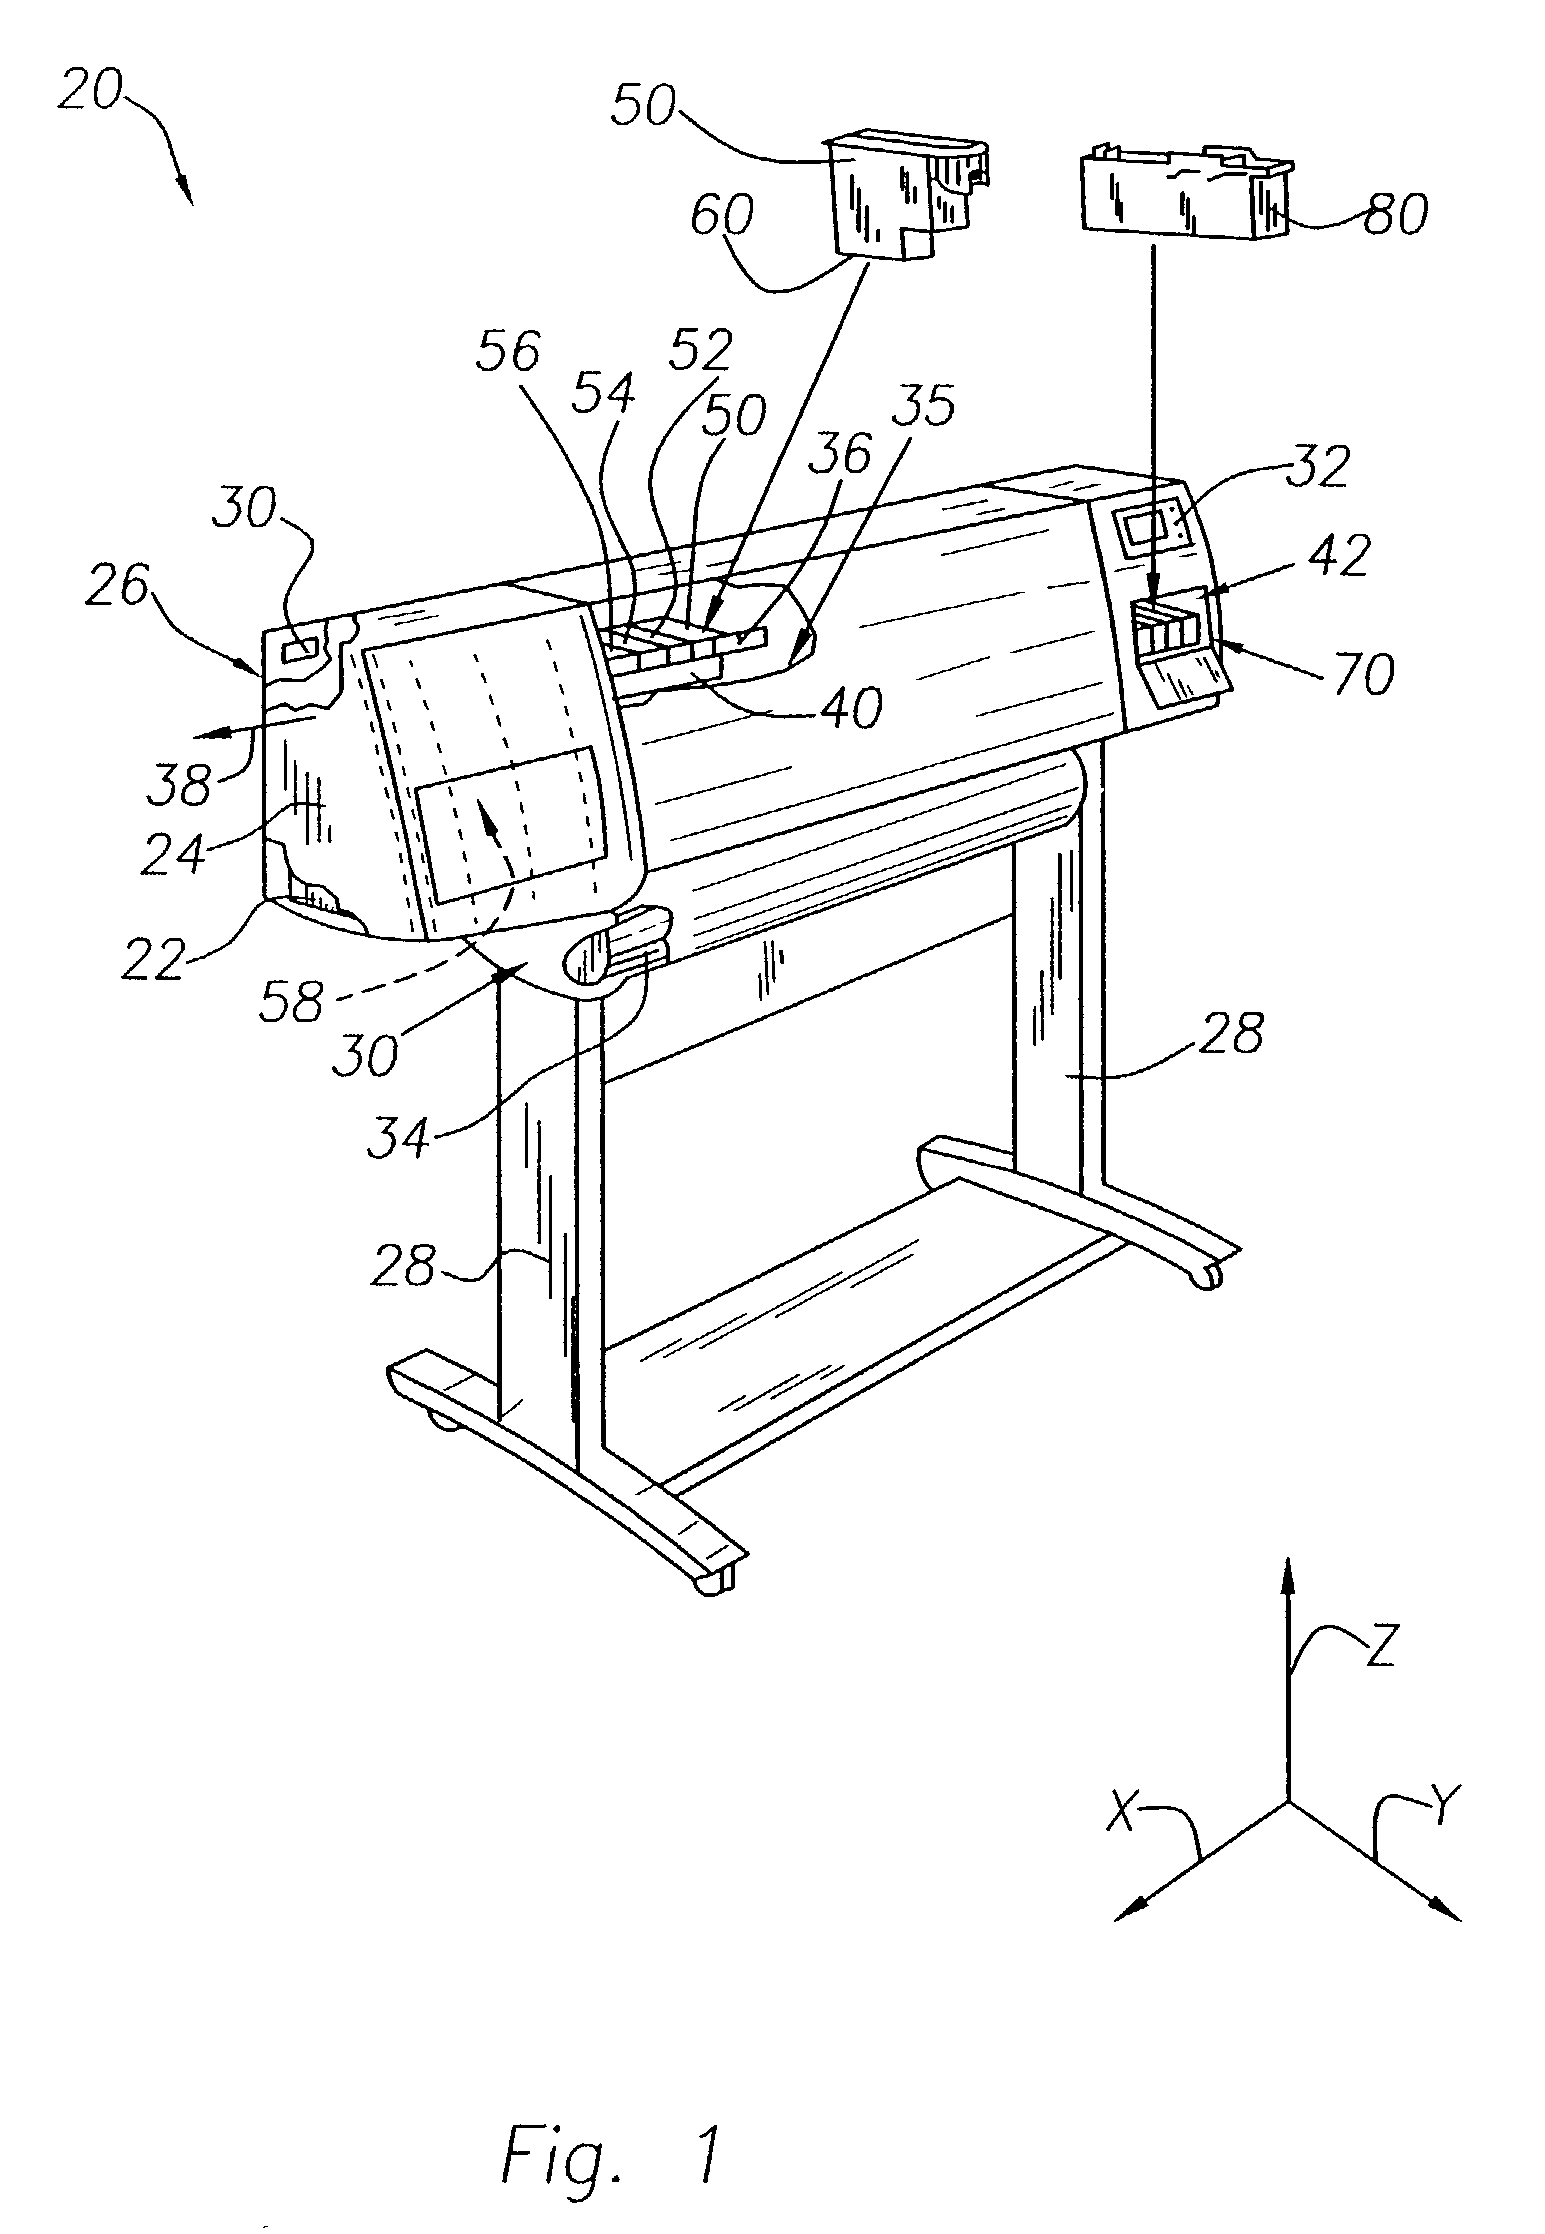 Method of servicing a pen when mounted in a printing device